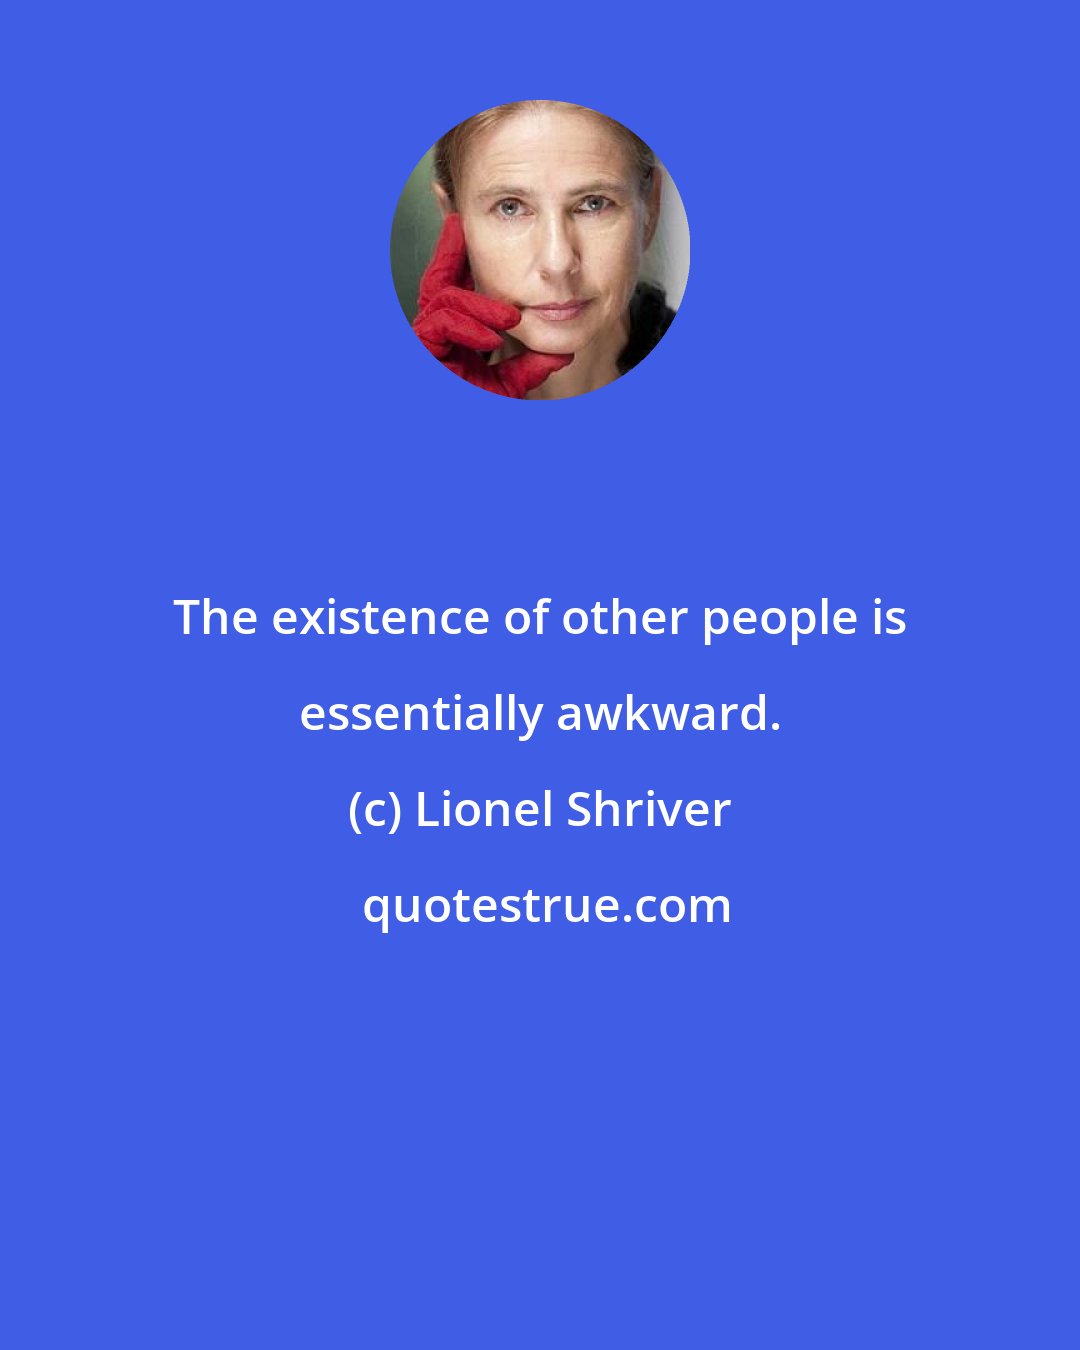 Lionel Shriver: The existence of other people is essentially awkward.